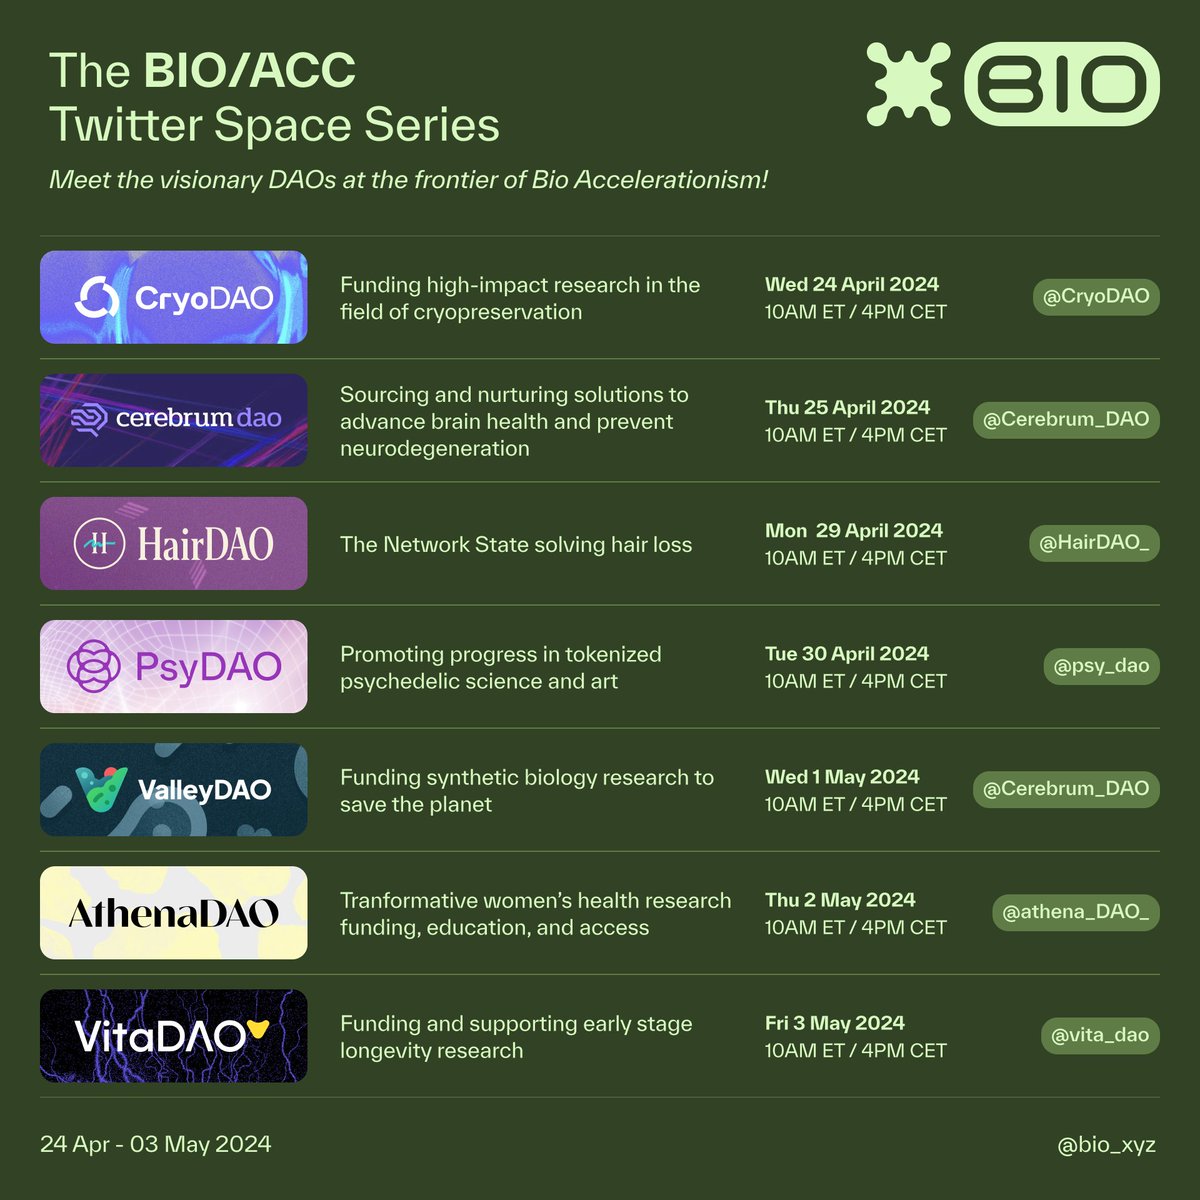 📣 Exciting news! @bio_xyz's partners will be hosting @X Spaces over the next two weeks as a part of our 'bio/acc Twitter Space Series' going over the latest and greatest from their DAO developments 🧑‍🔬 Tune in when each goes live to meet the visionaries. Details below👇